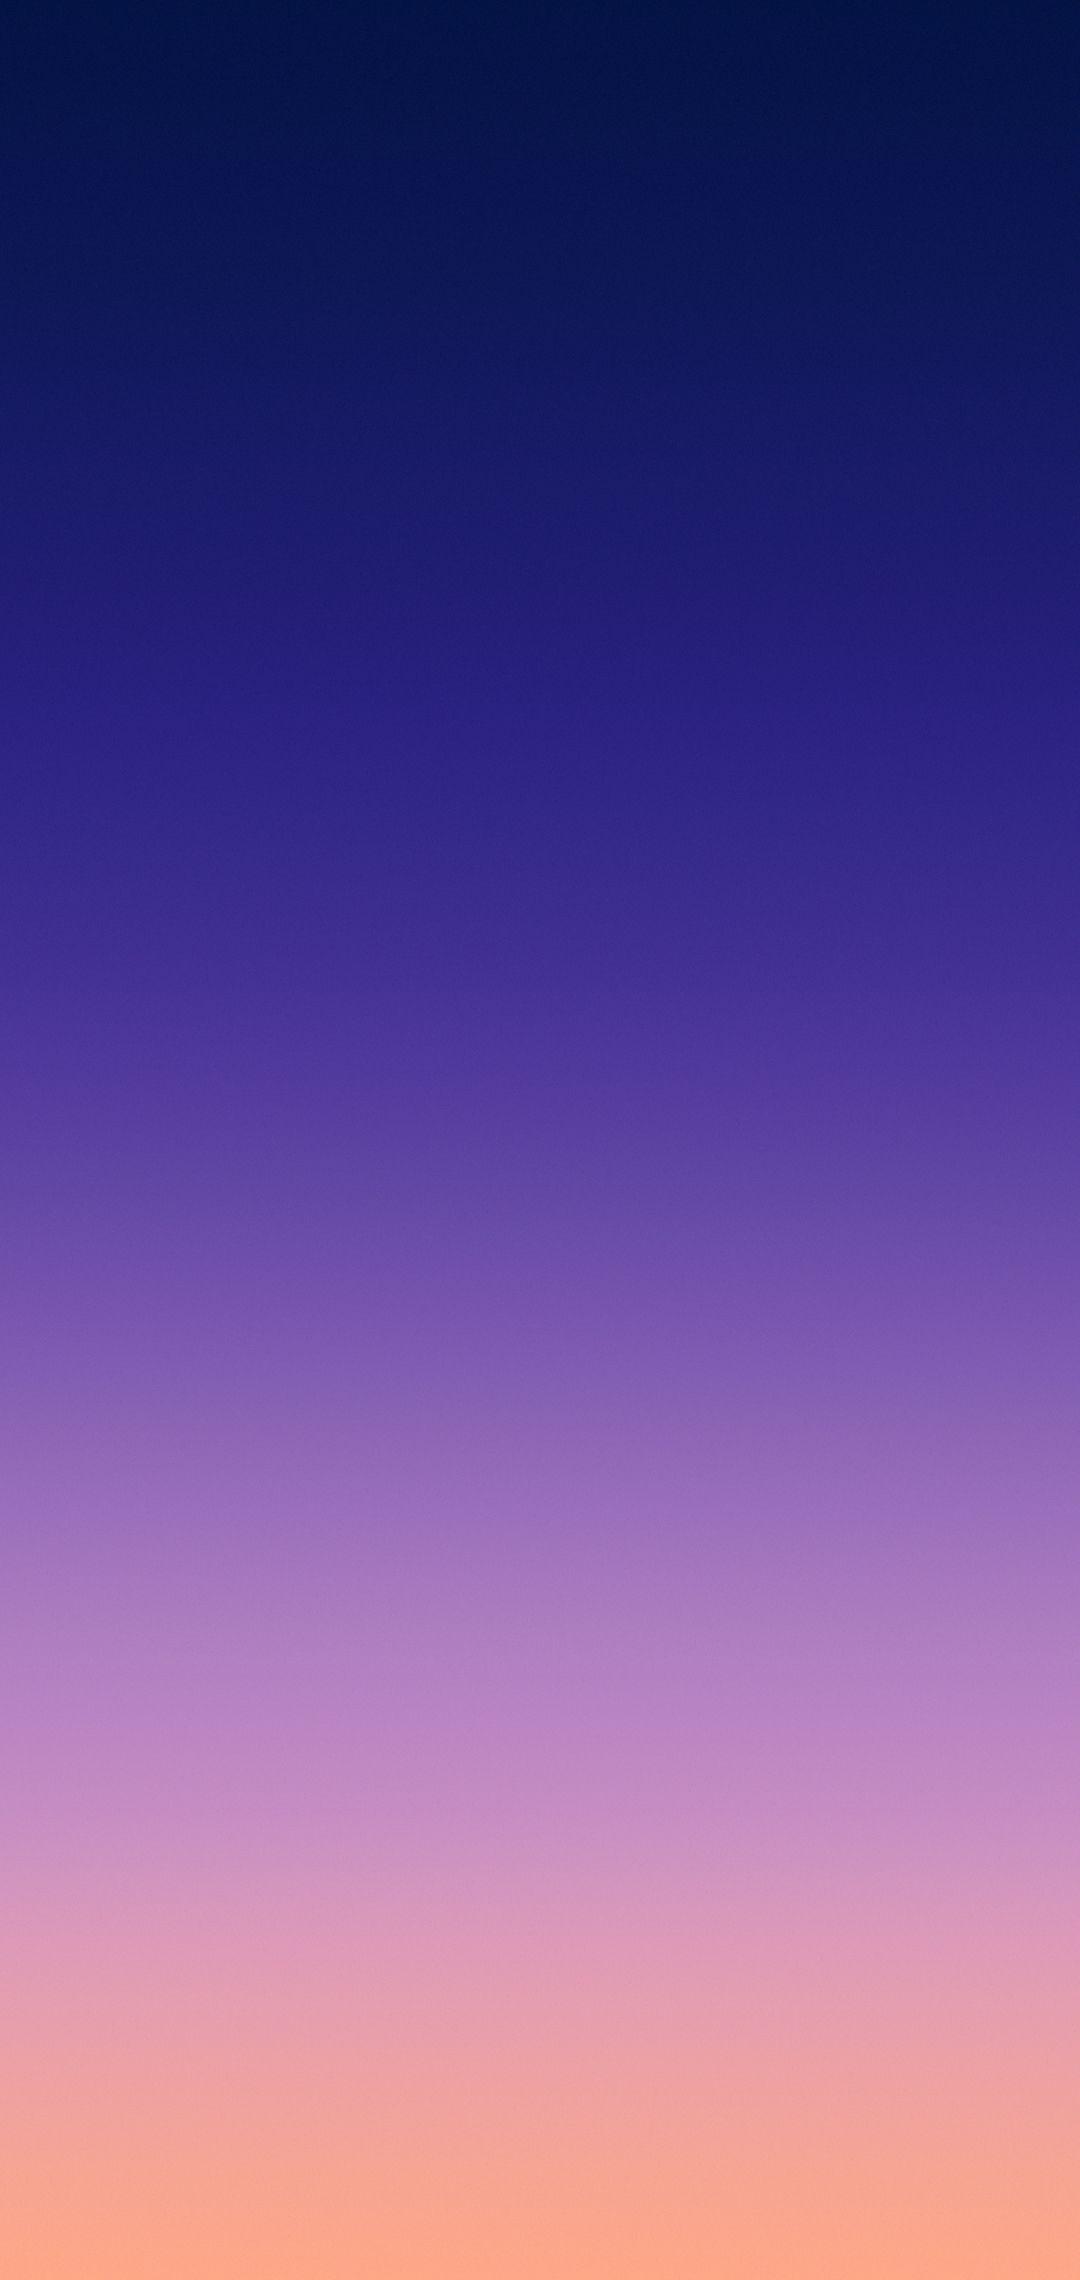 Redmi Note 6 Pro Wallpapers